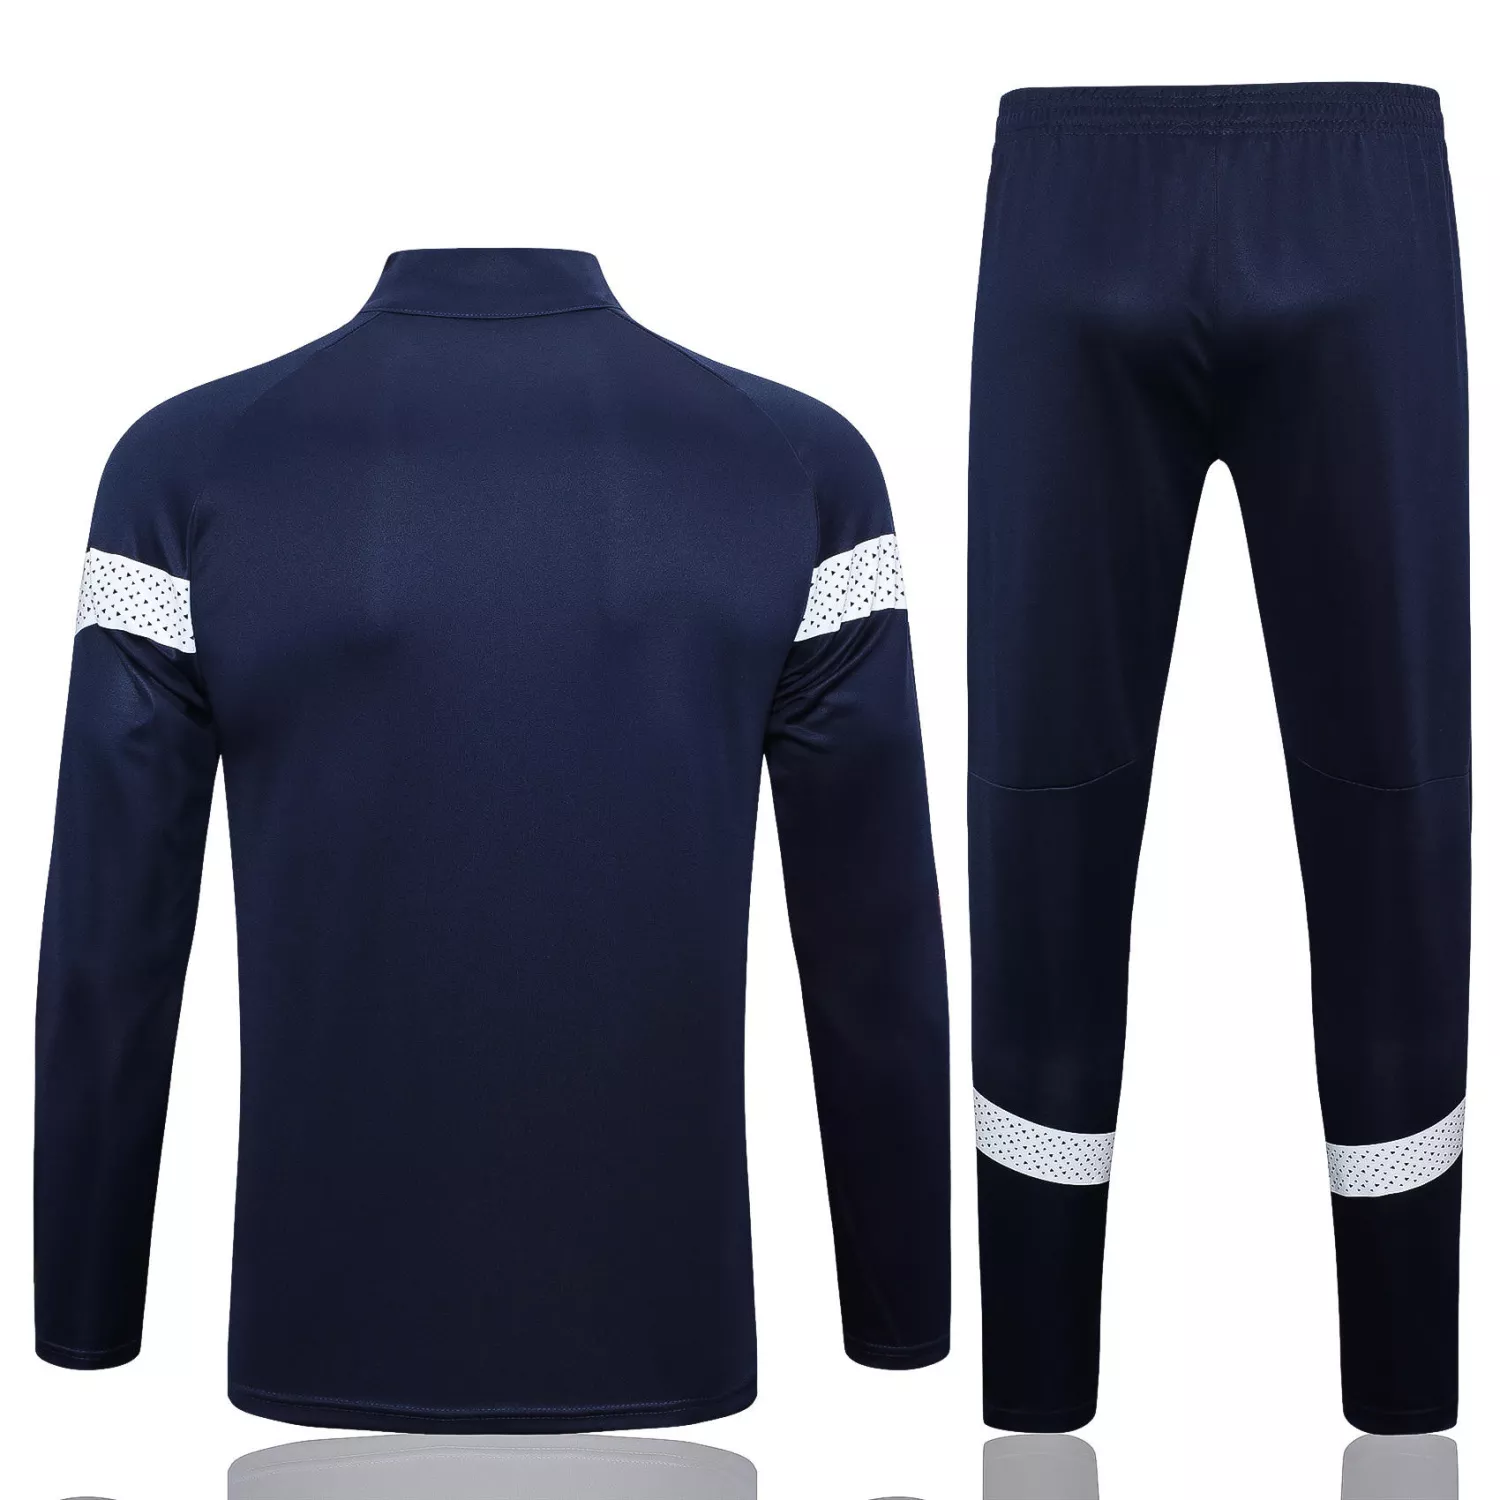 olympique marseille navy white tracksuit